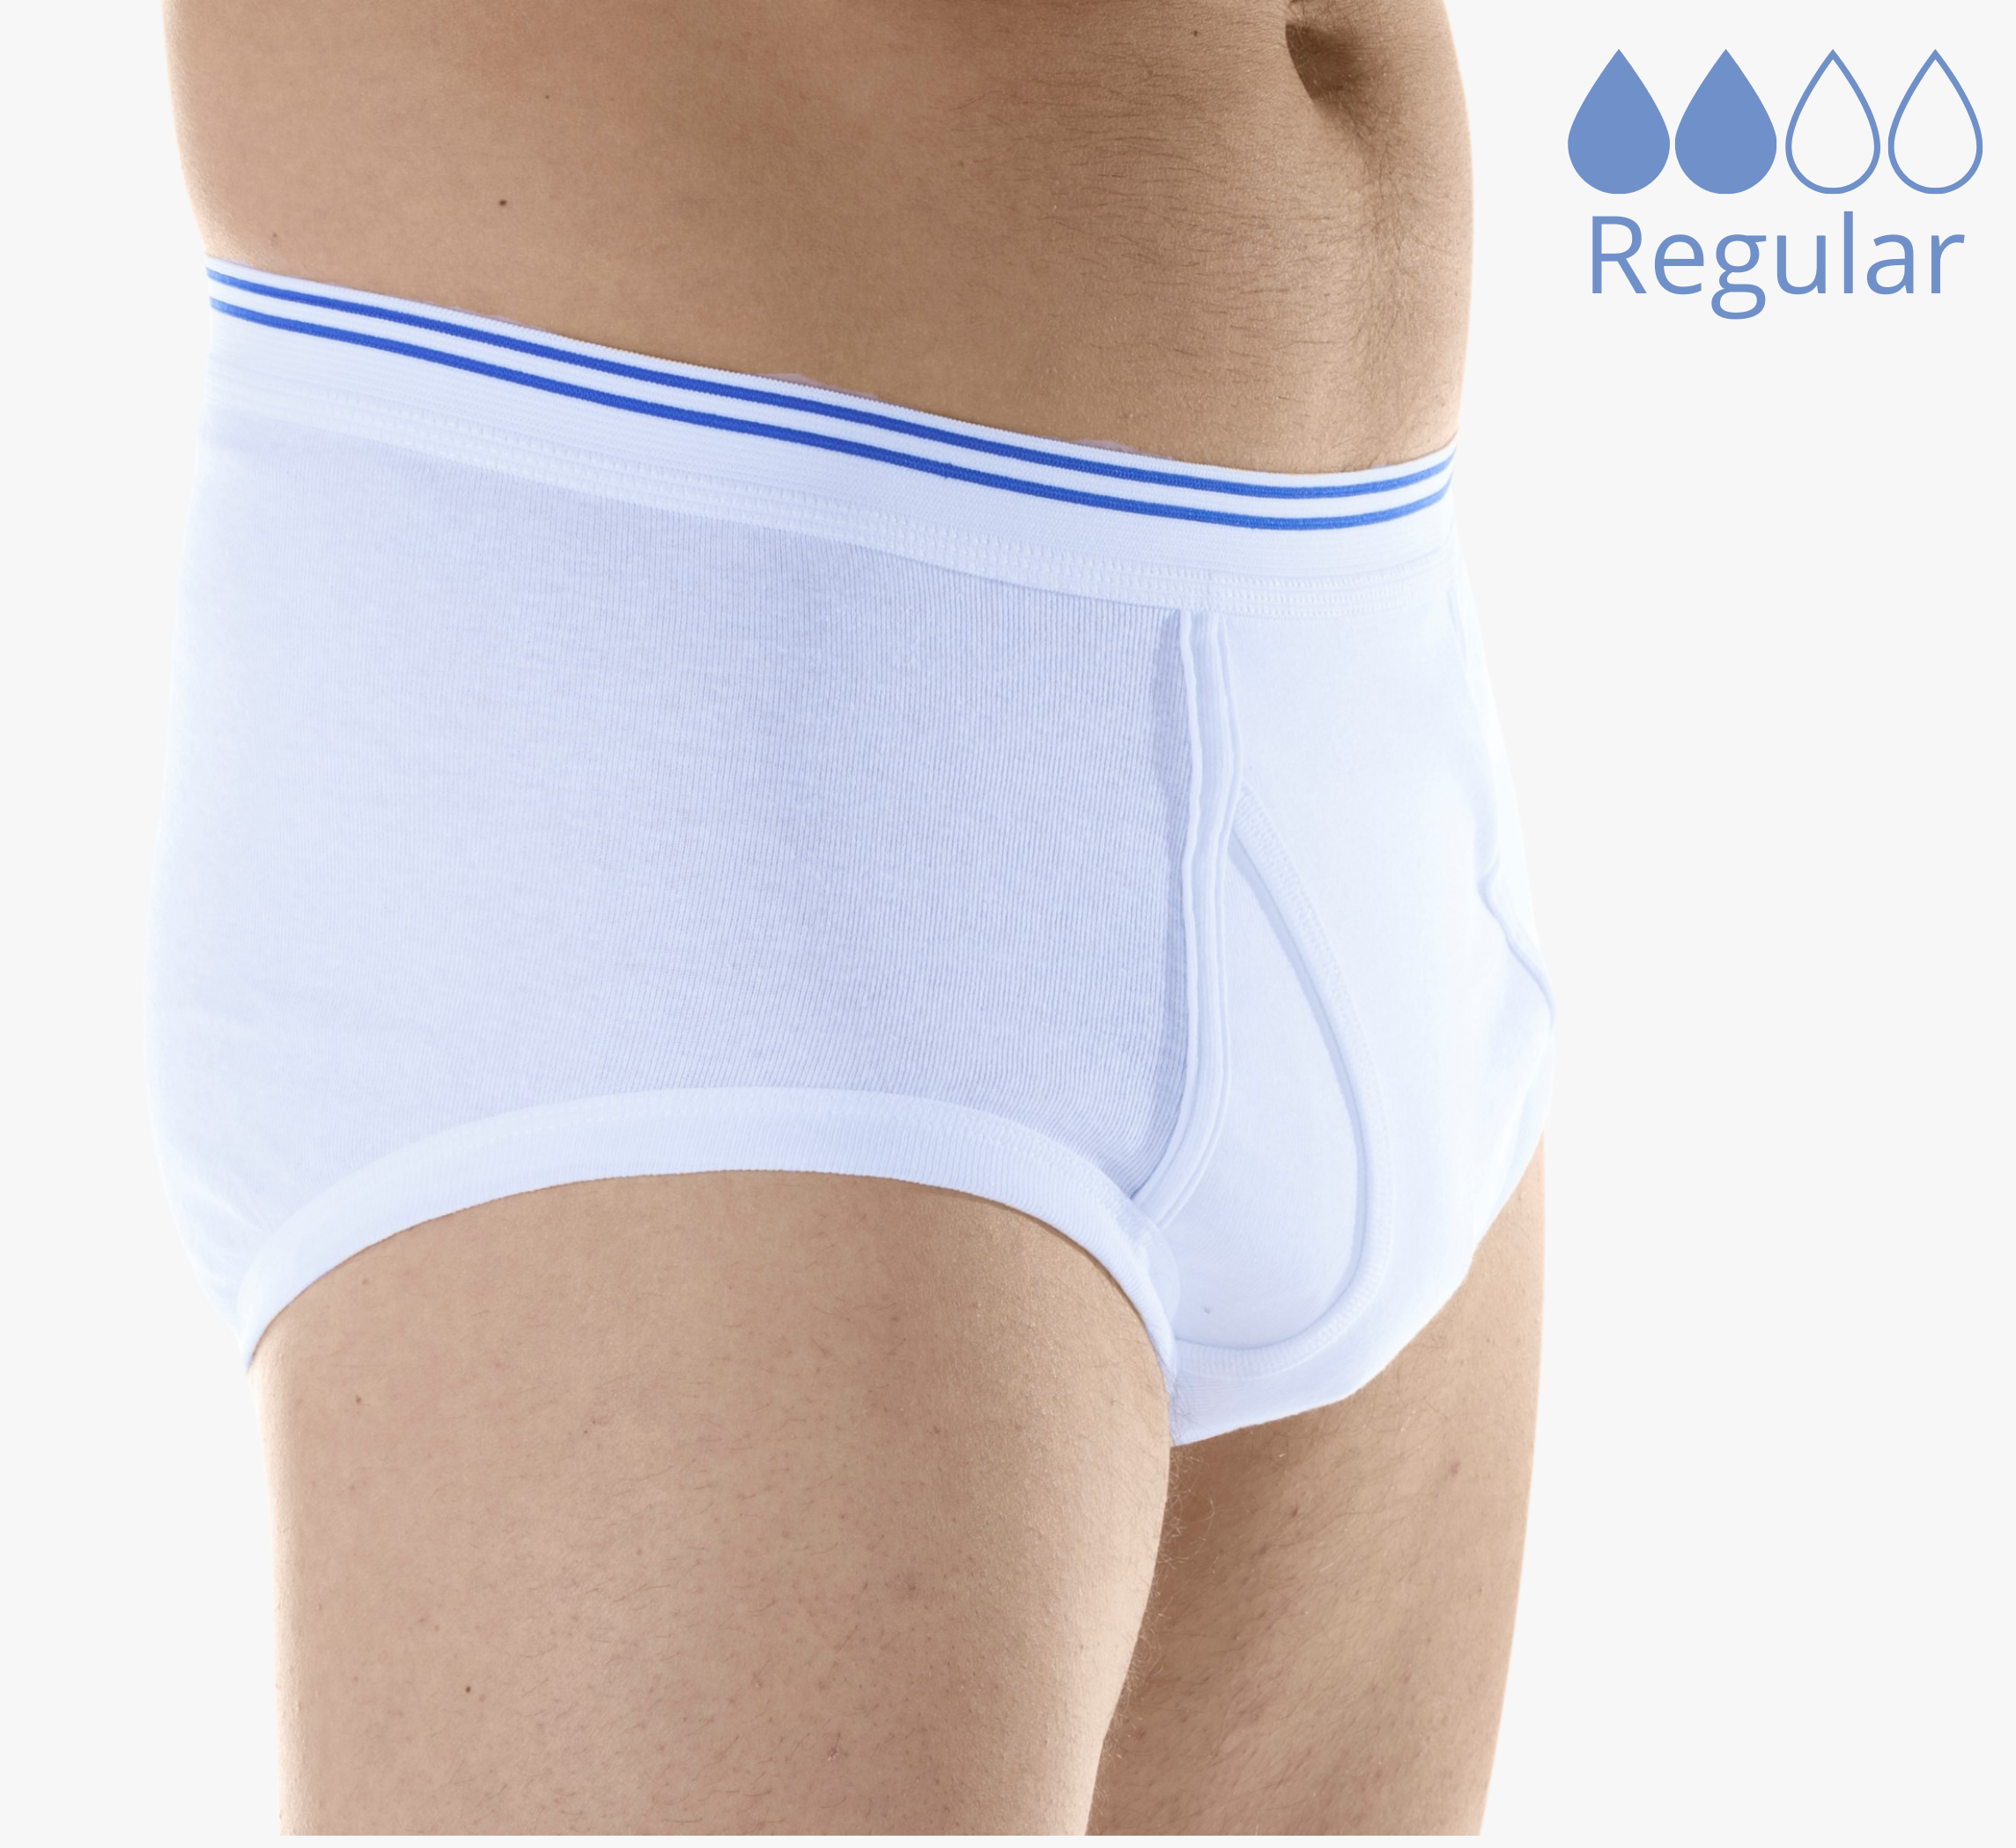 Everdries Leakproof Underwear For Women Incontinence,Leak Protect